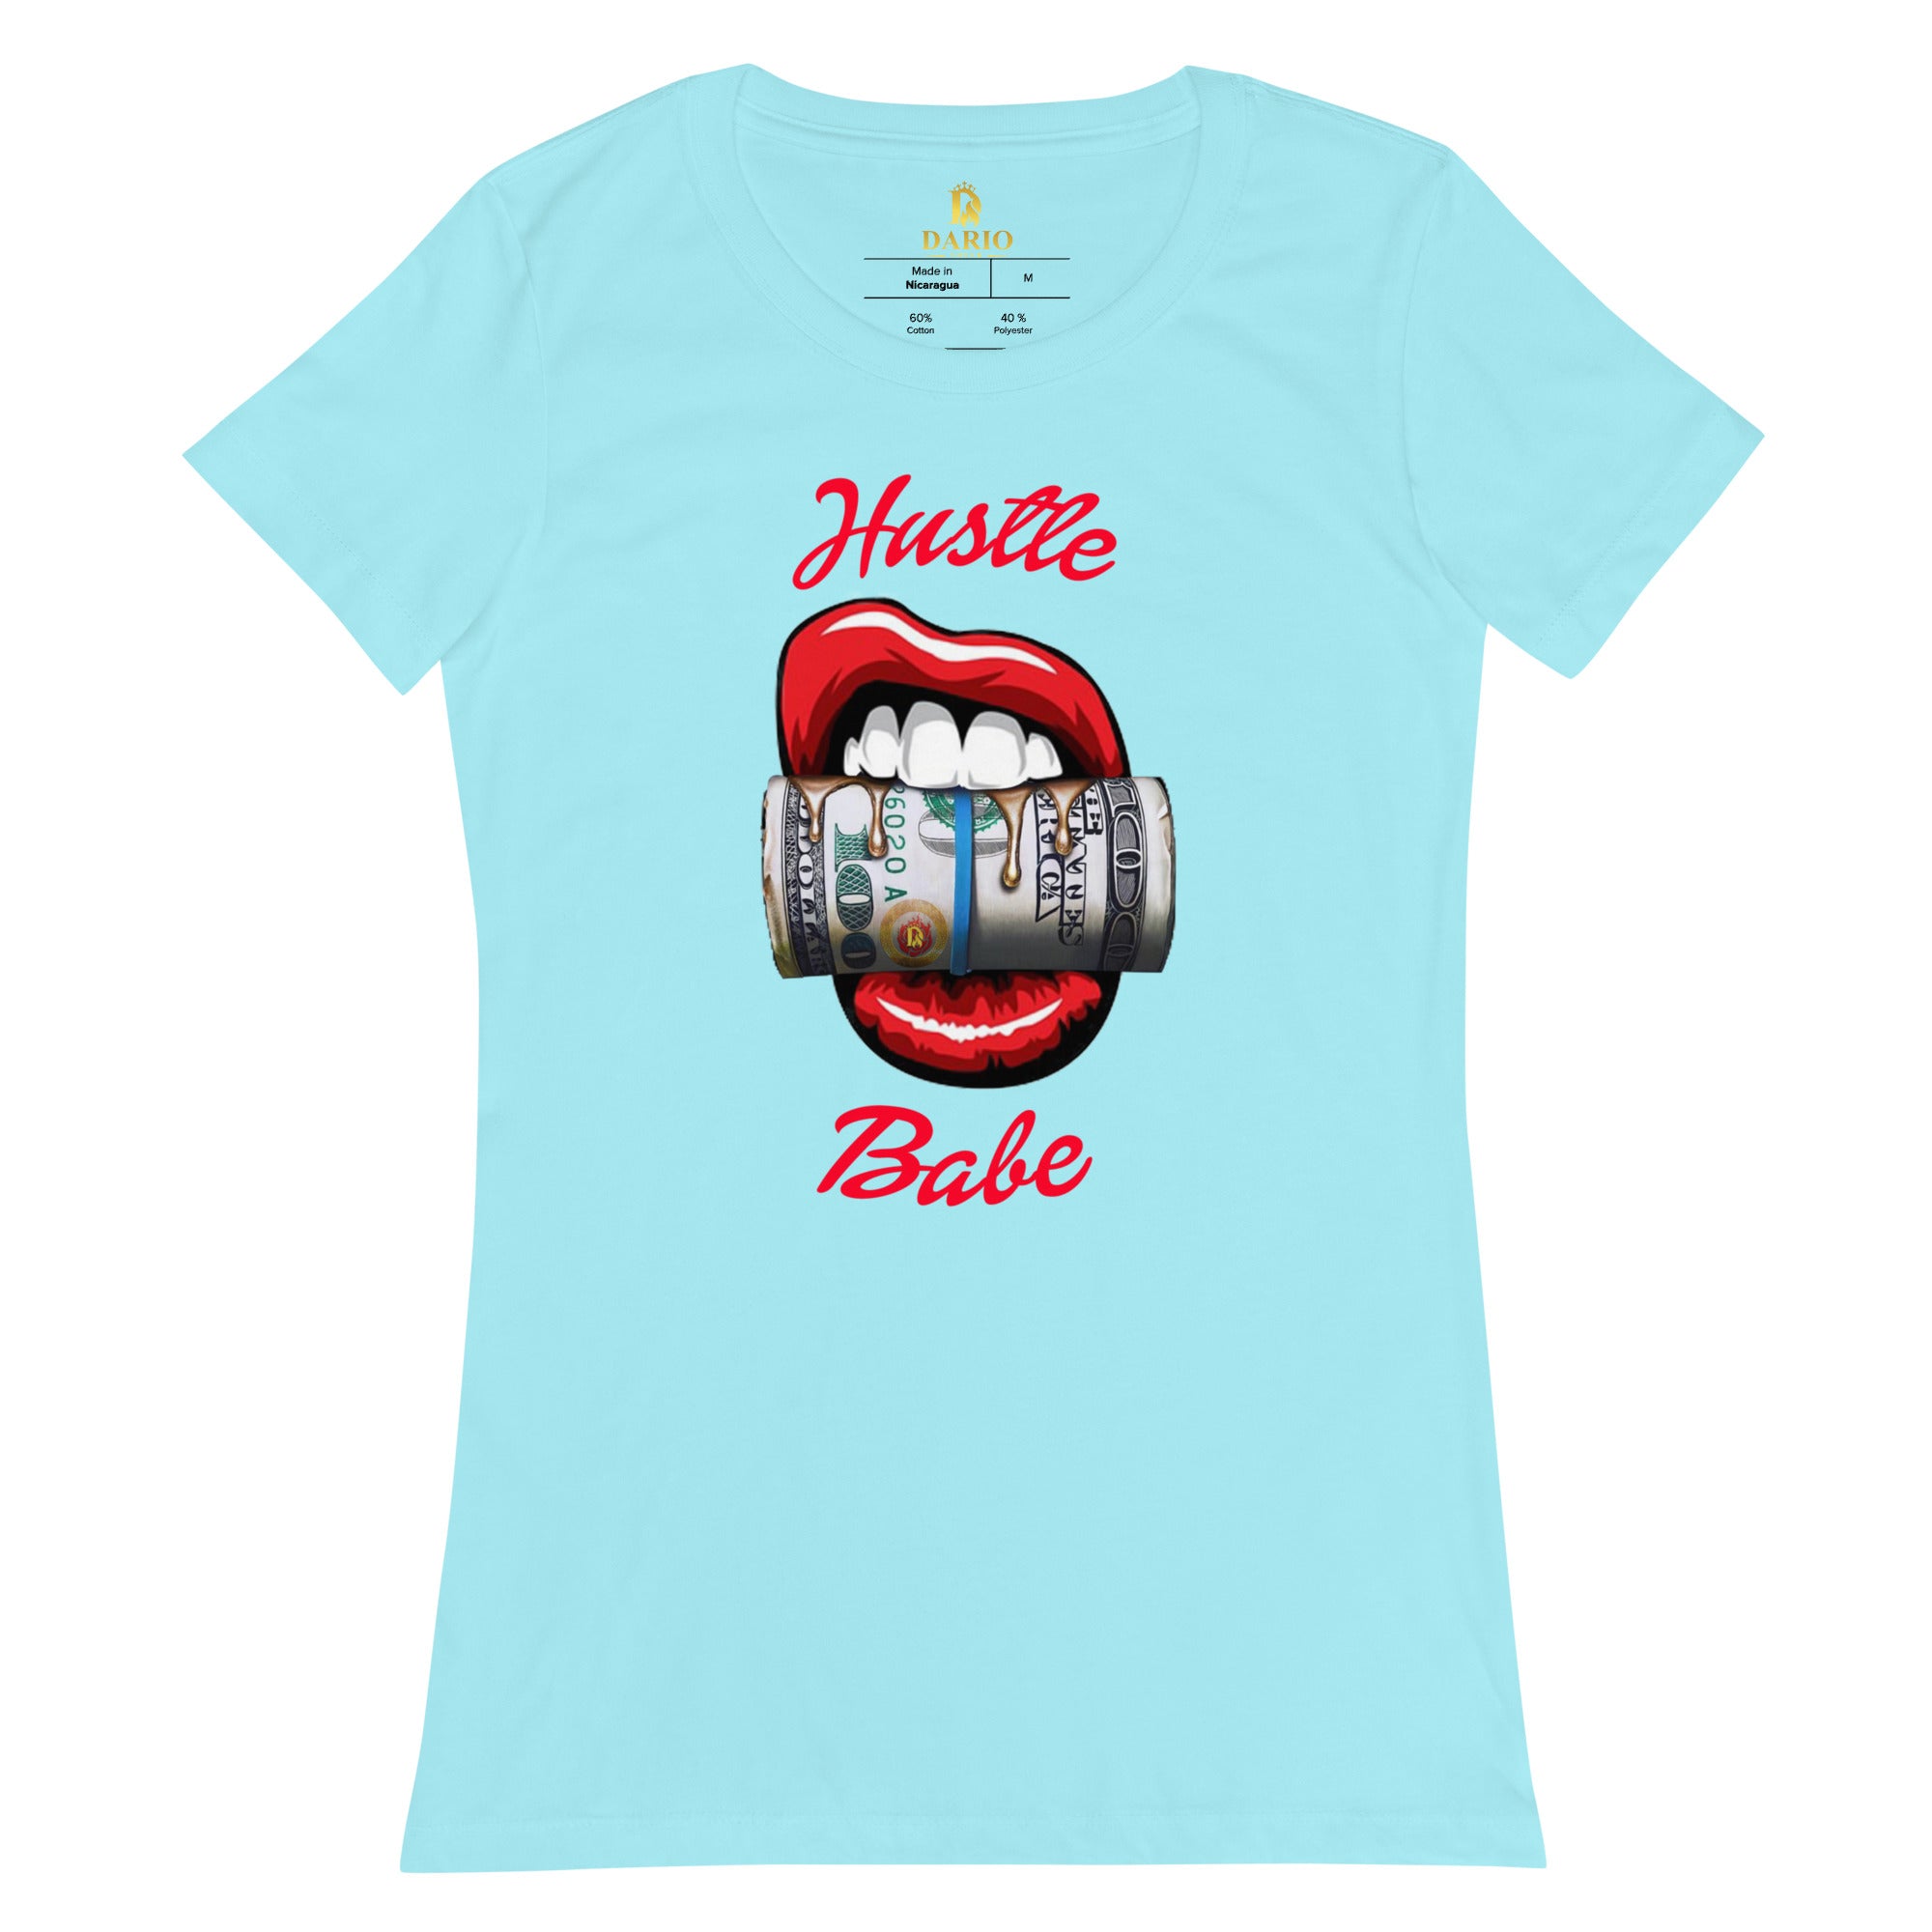 Women’s fitted Hustle Babe Red Tee